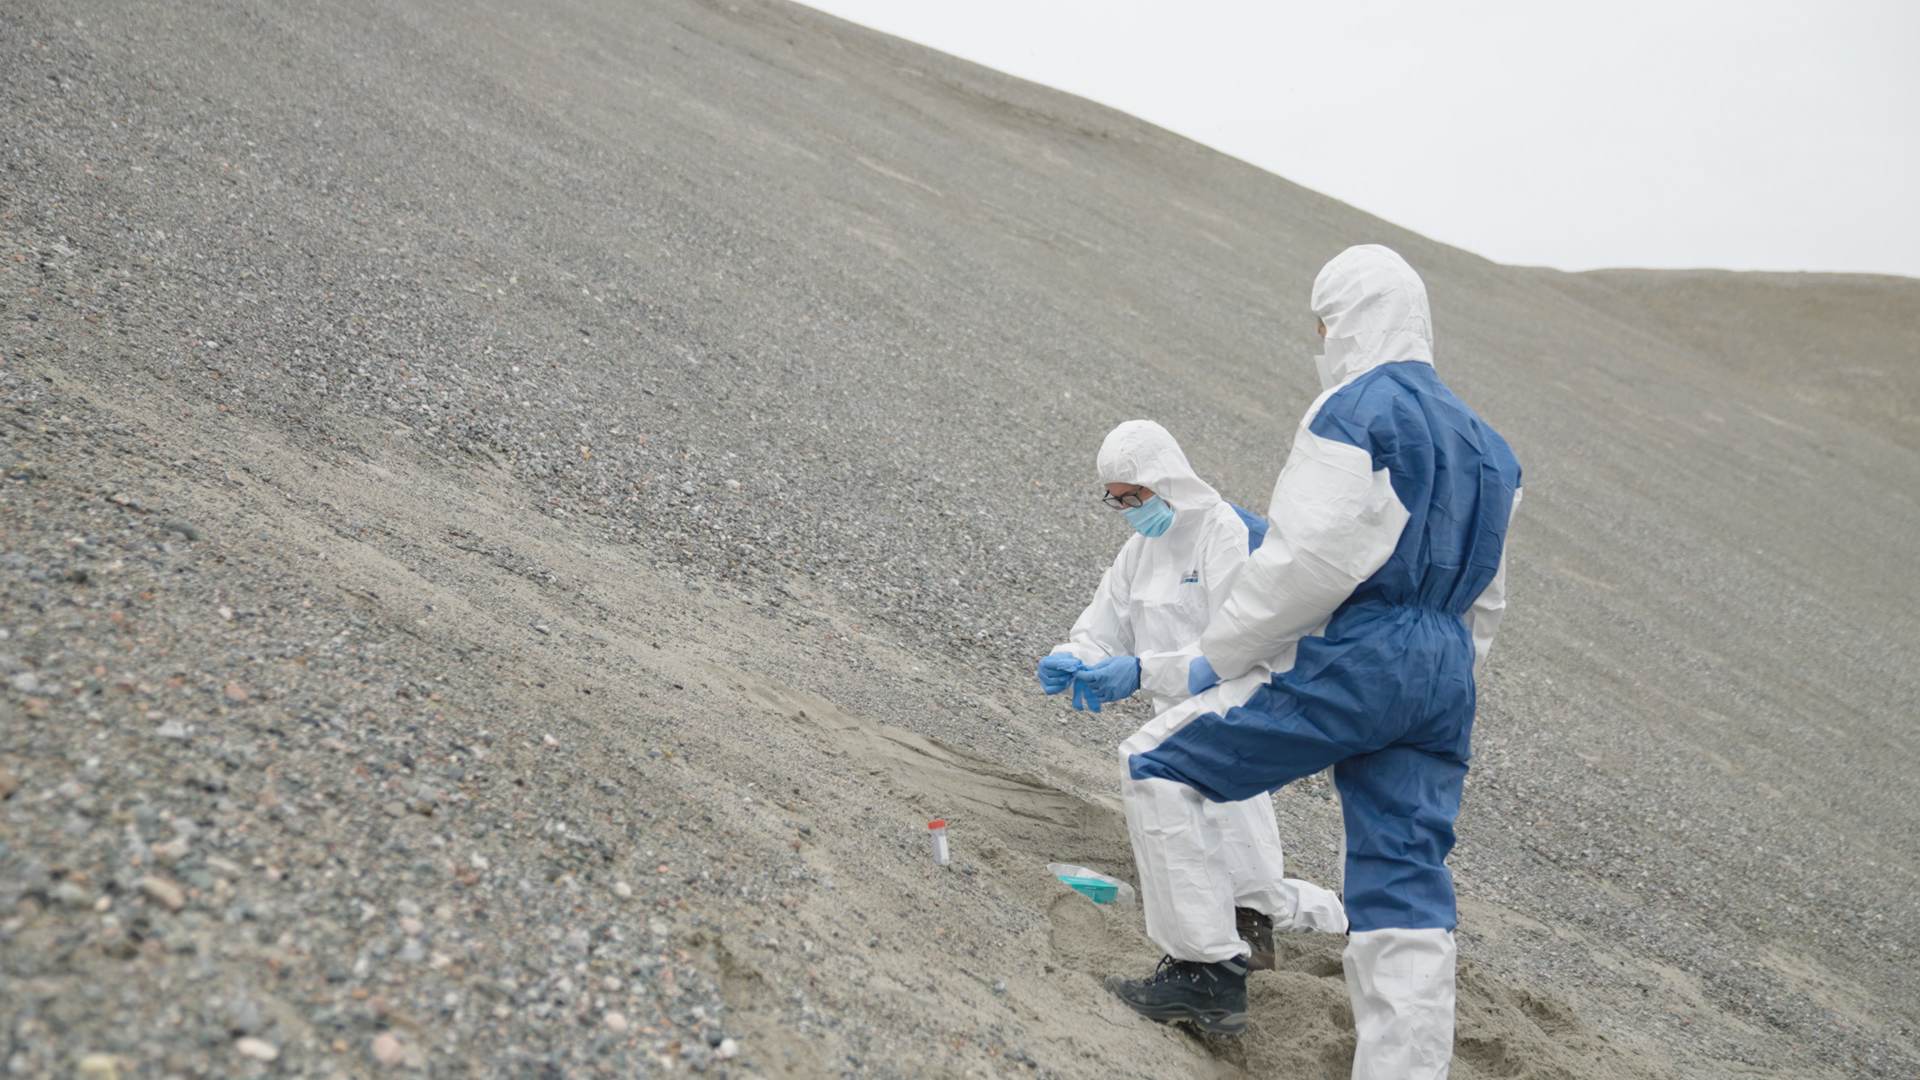 The same area today, as researchers gather samples while avoiding contamination.